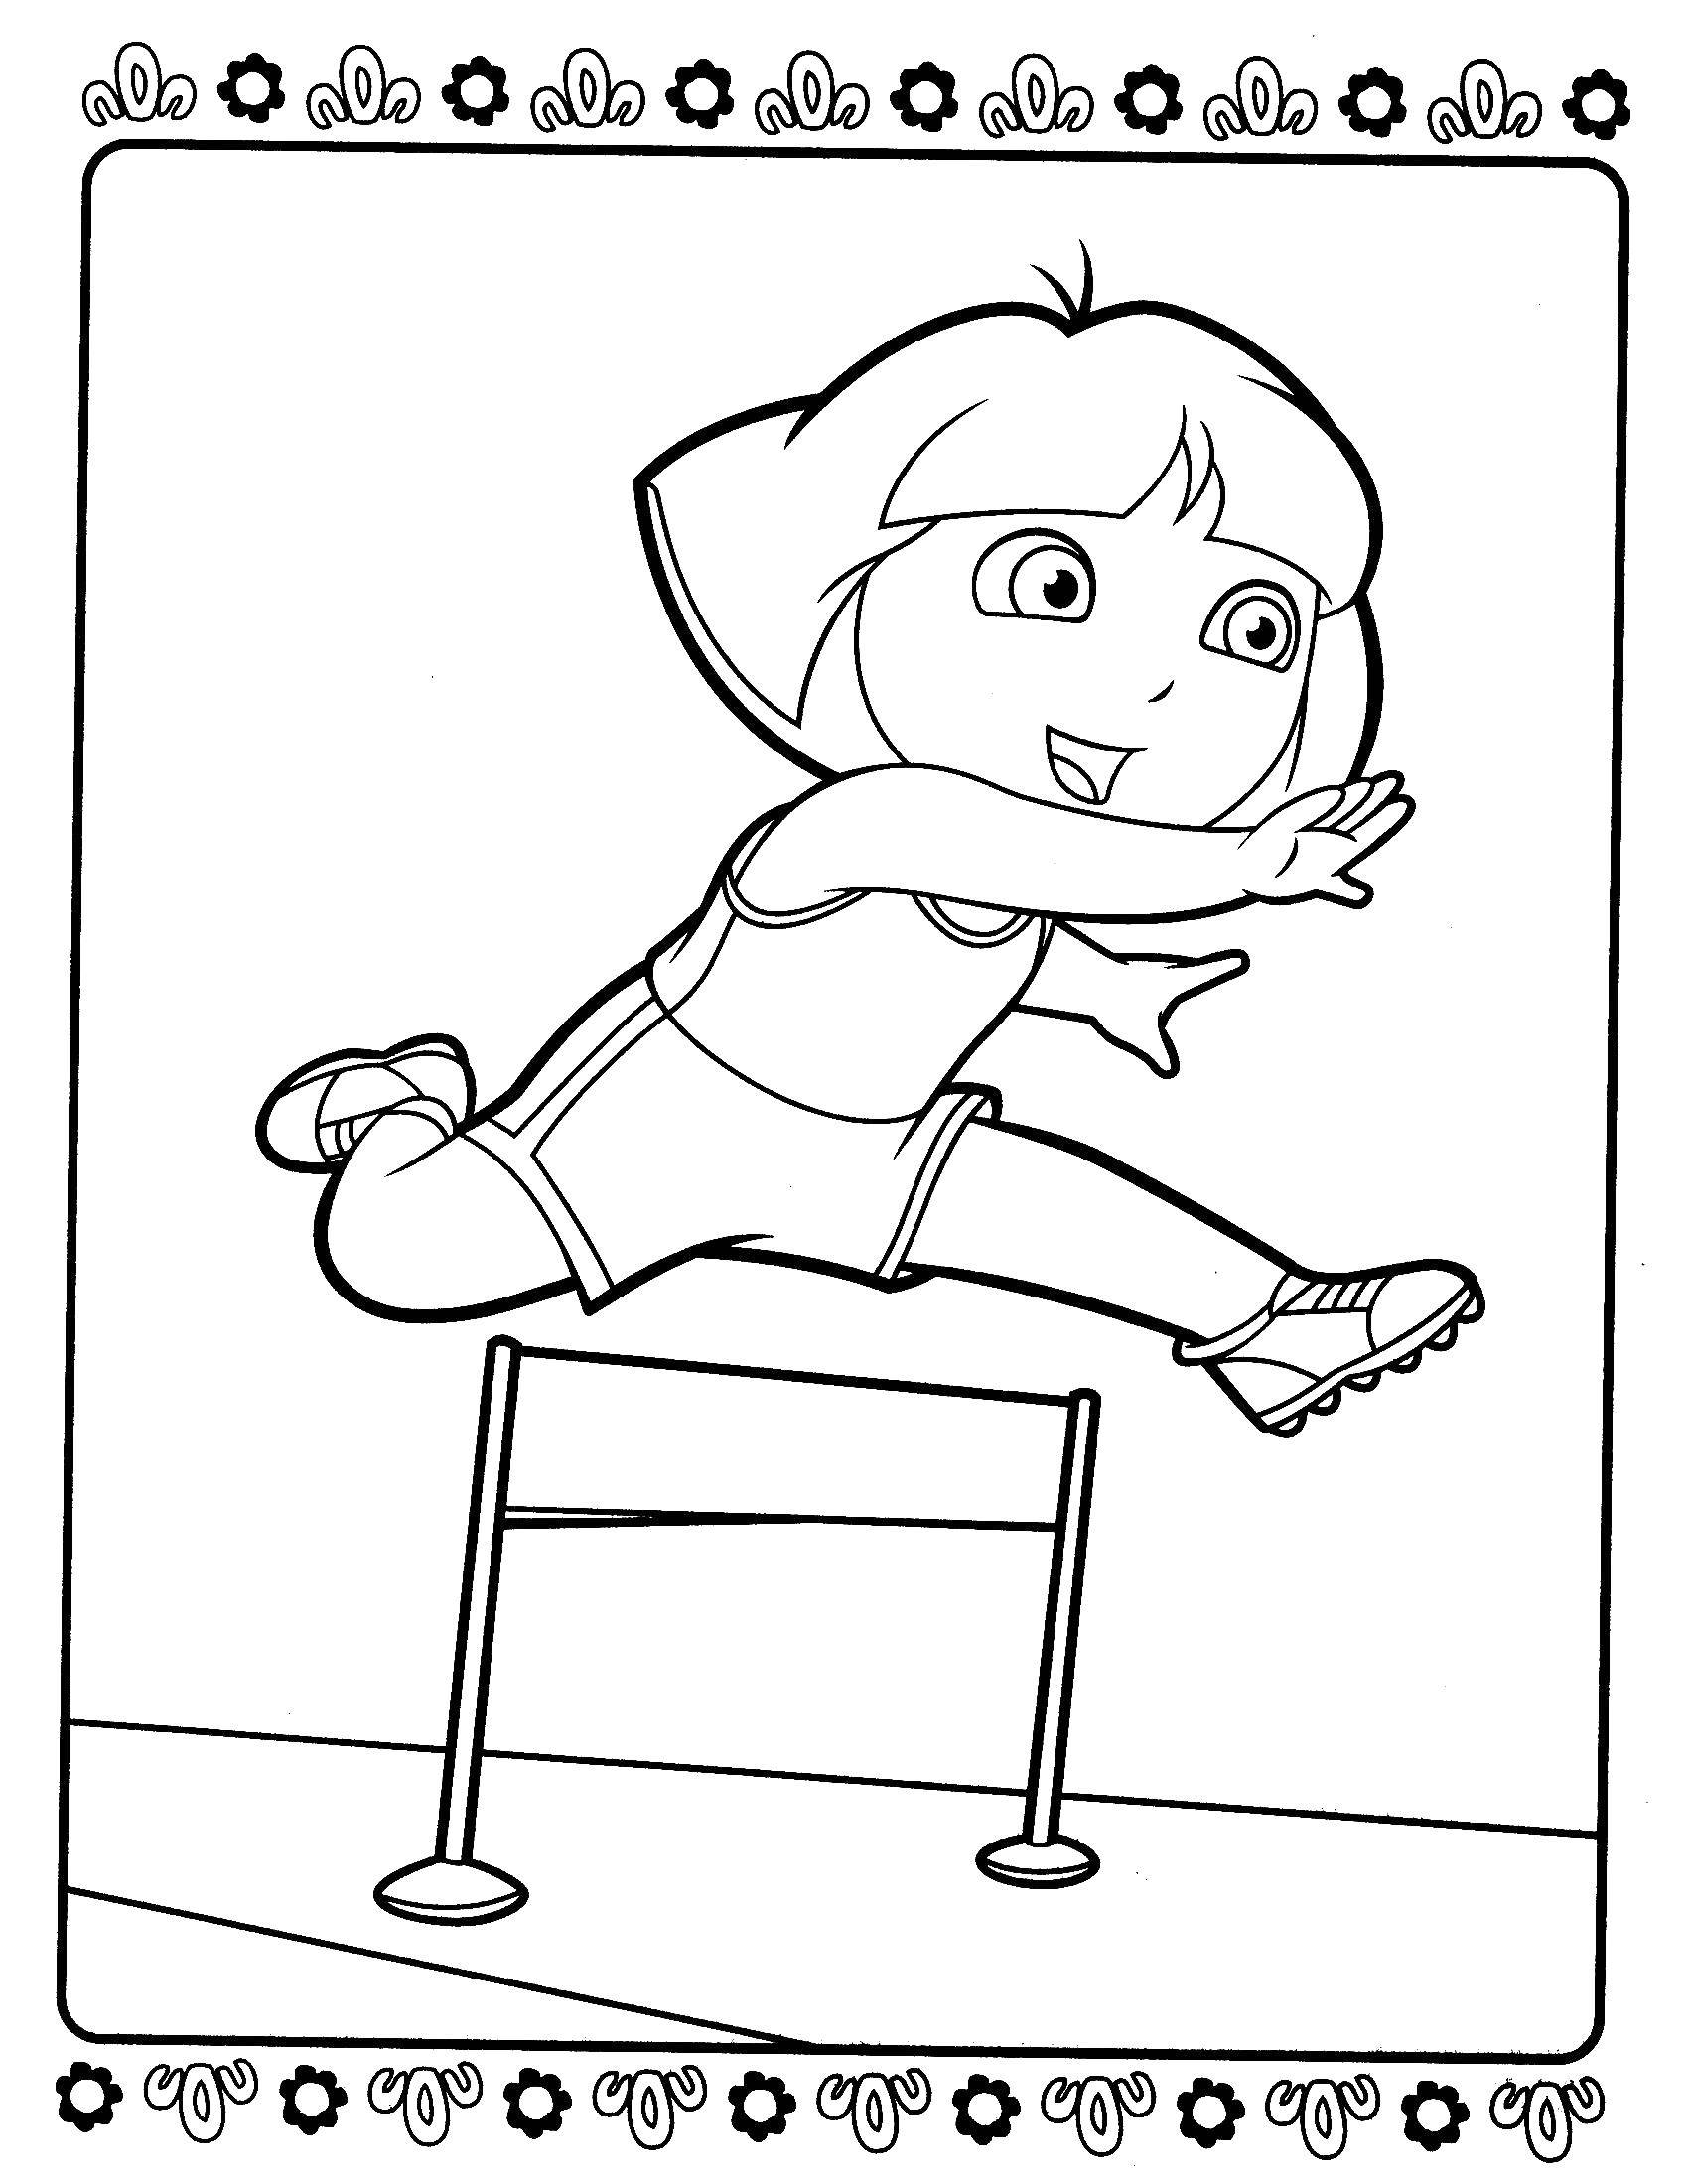 Coloring Dora jumps through an obstacle. Category Dora. Tags:  Dora, athletics.